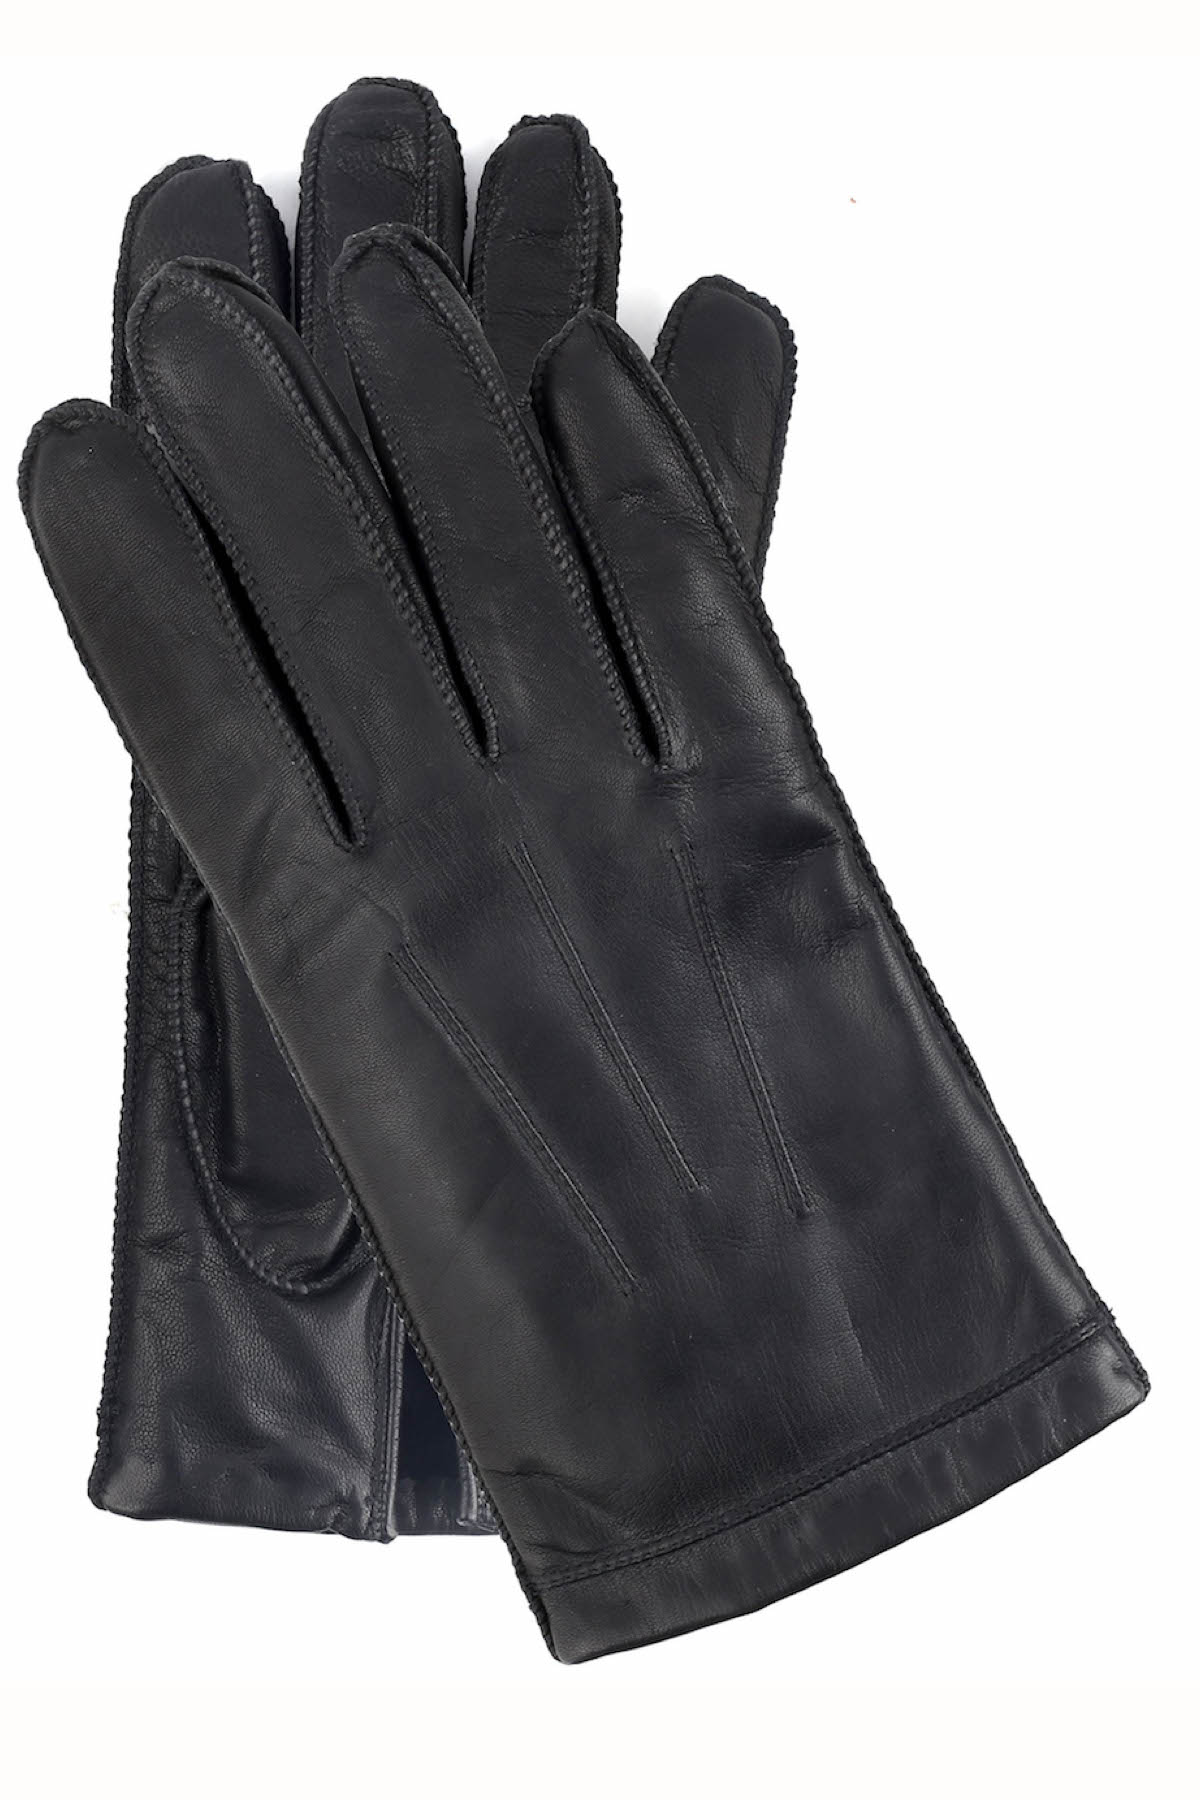 Isotoner Signature Black Vented Palm Smooth Leather Gloves